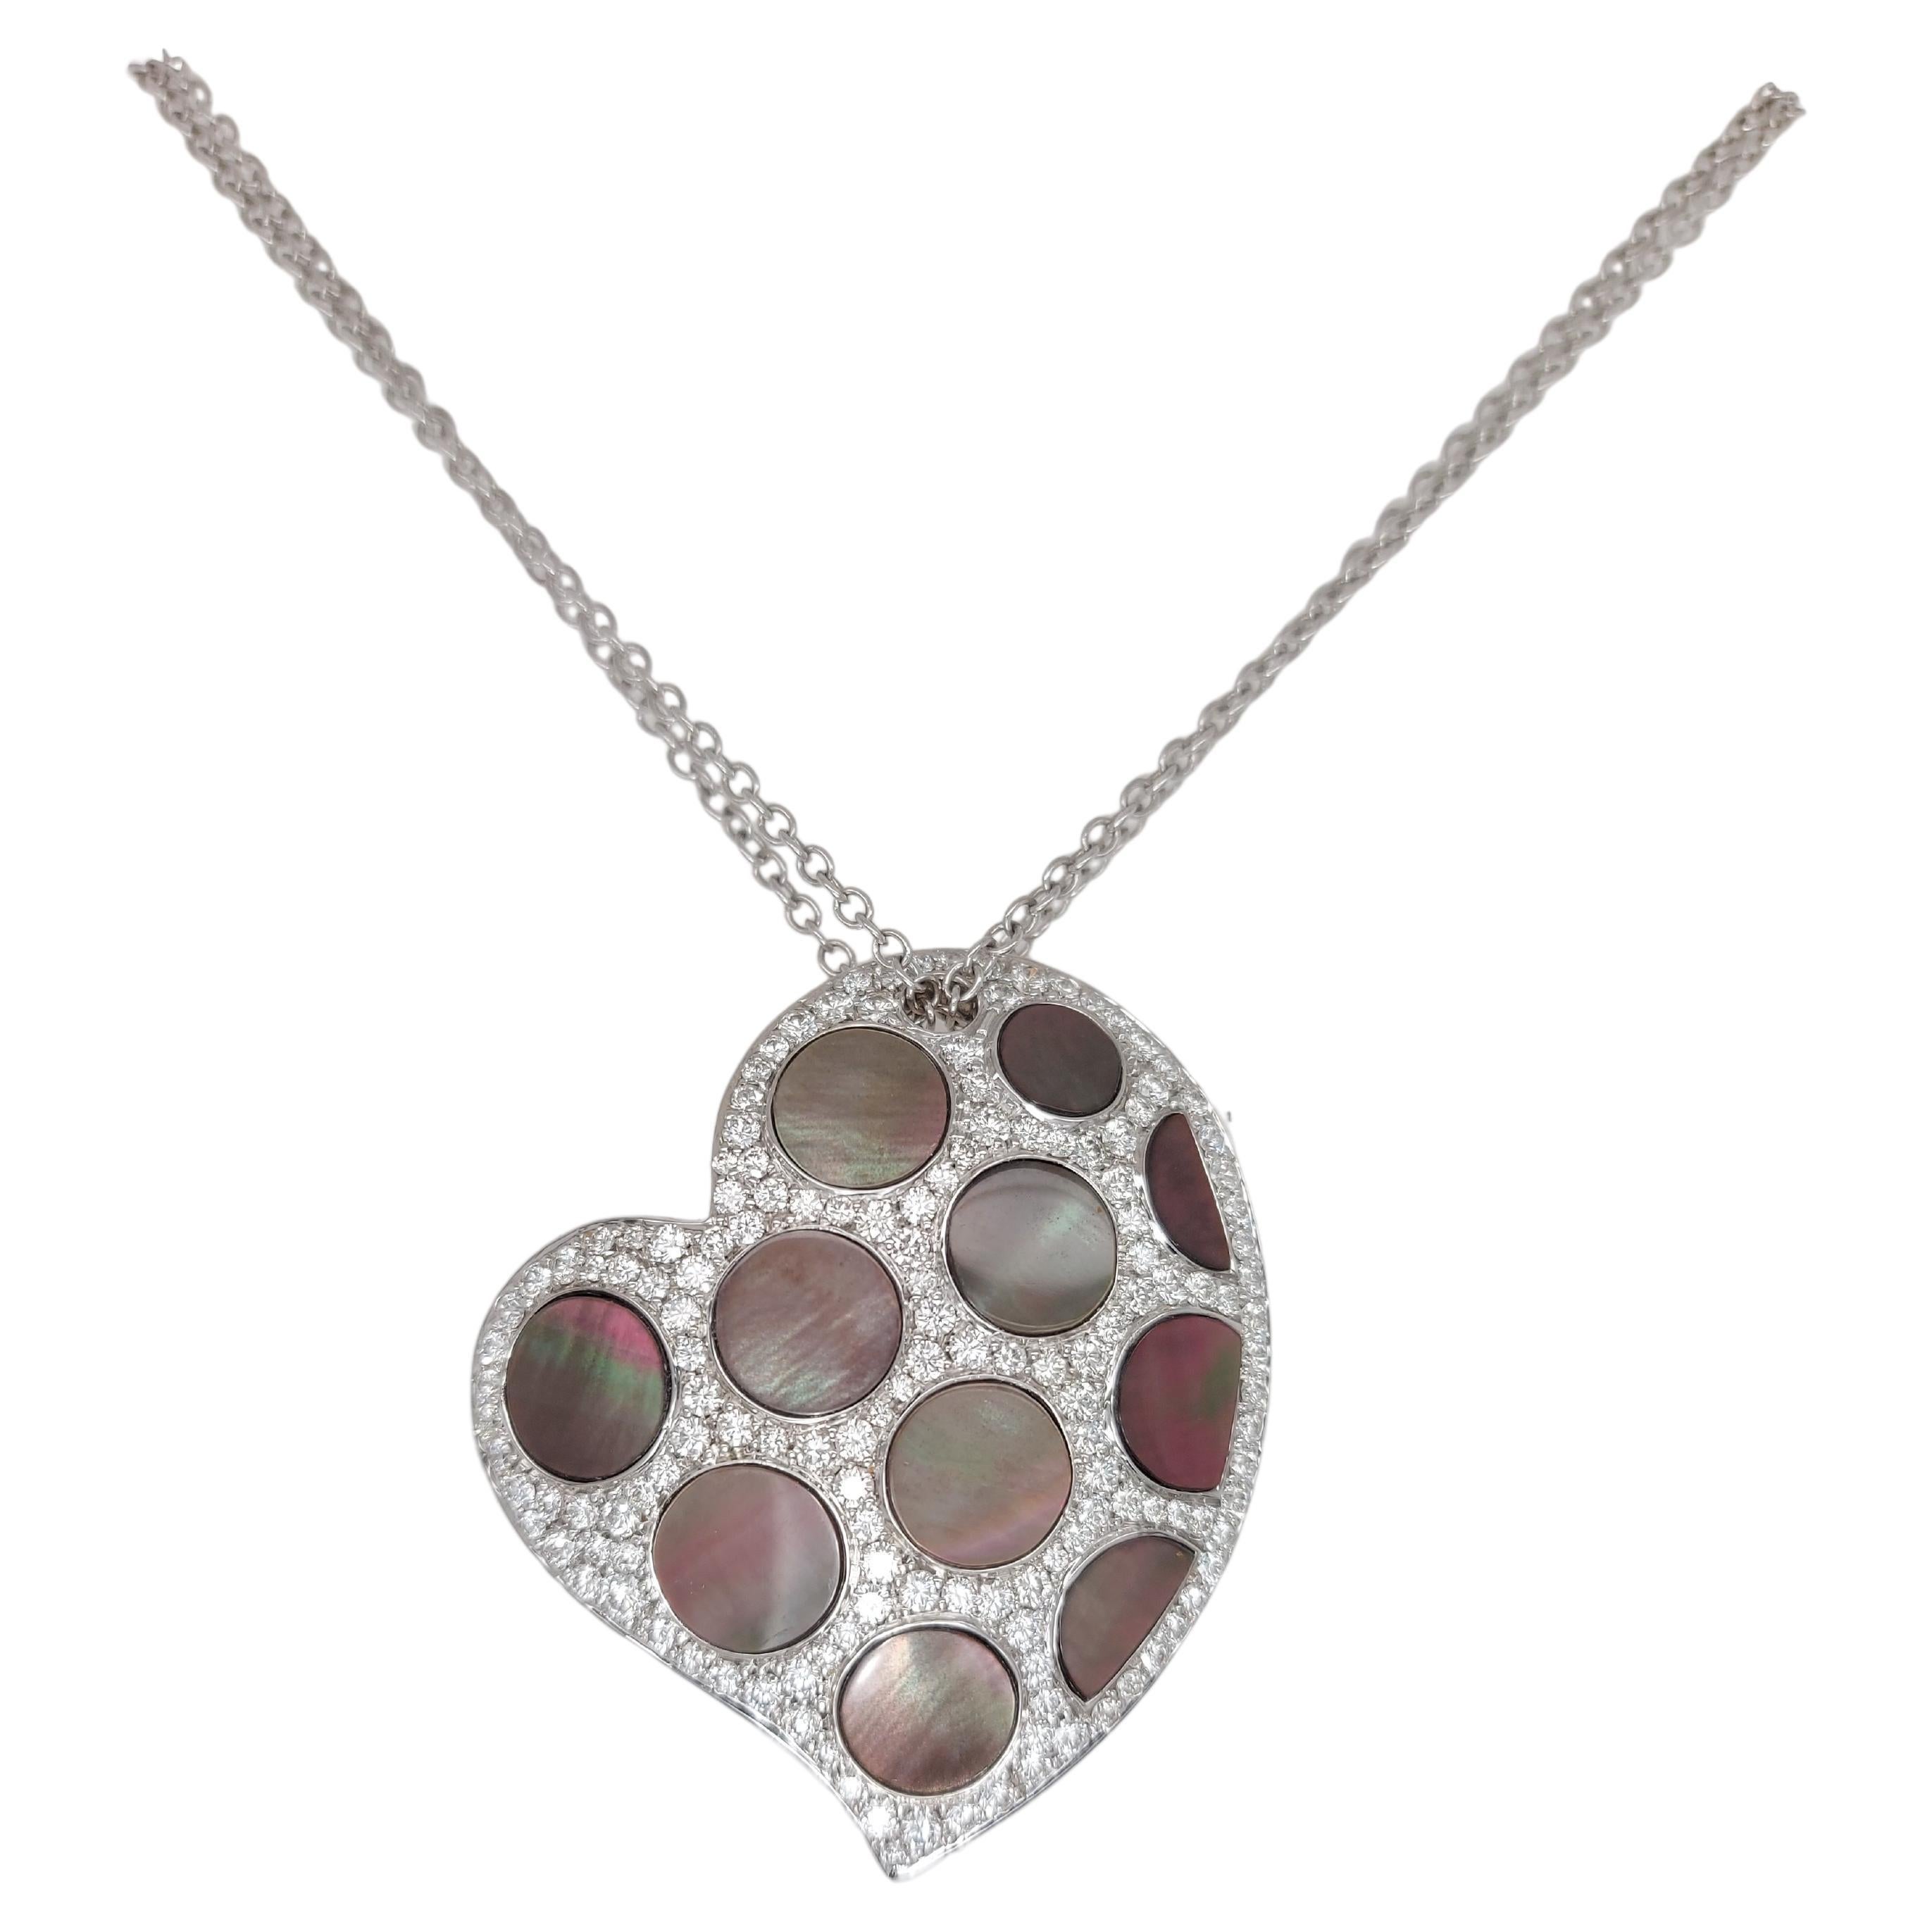 Gorgeous 18kt White Gold Diamond Pendant Necklace & Black Mother of Pearl For Sale